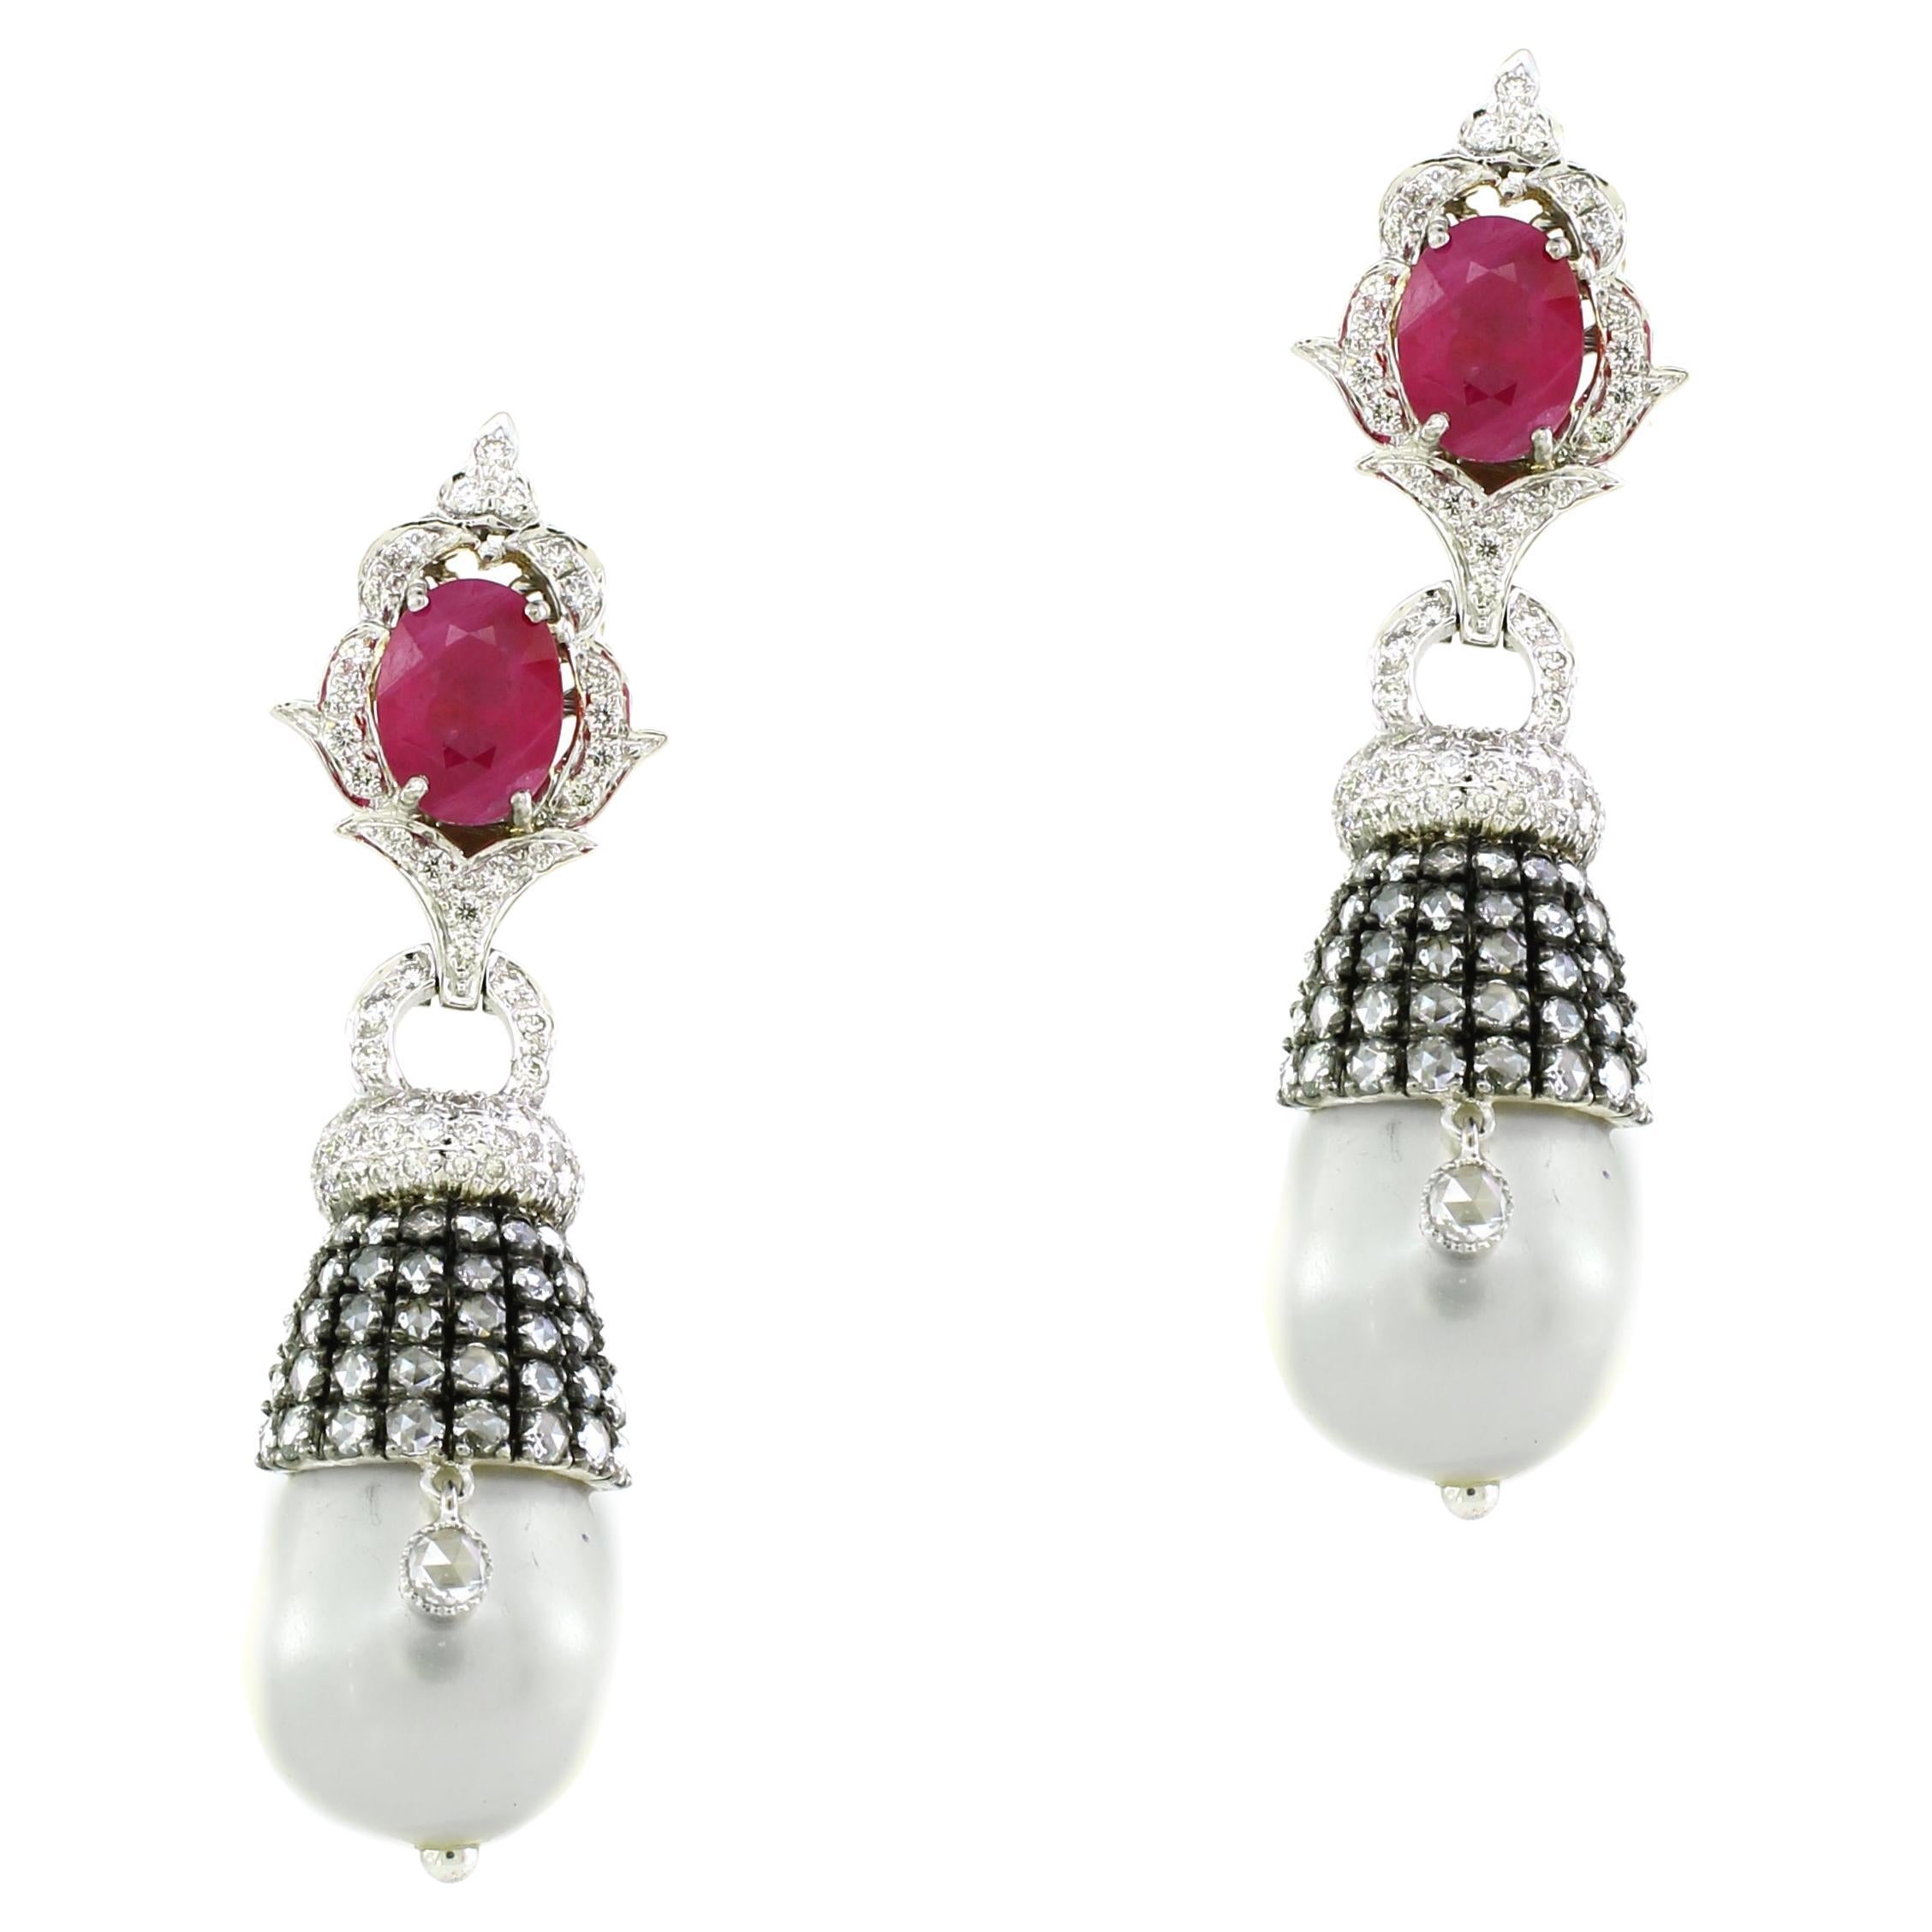 31.26 carats of Pearl Drop Earrings For Sale